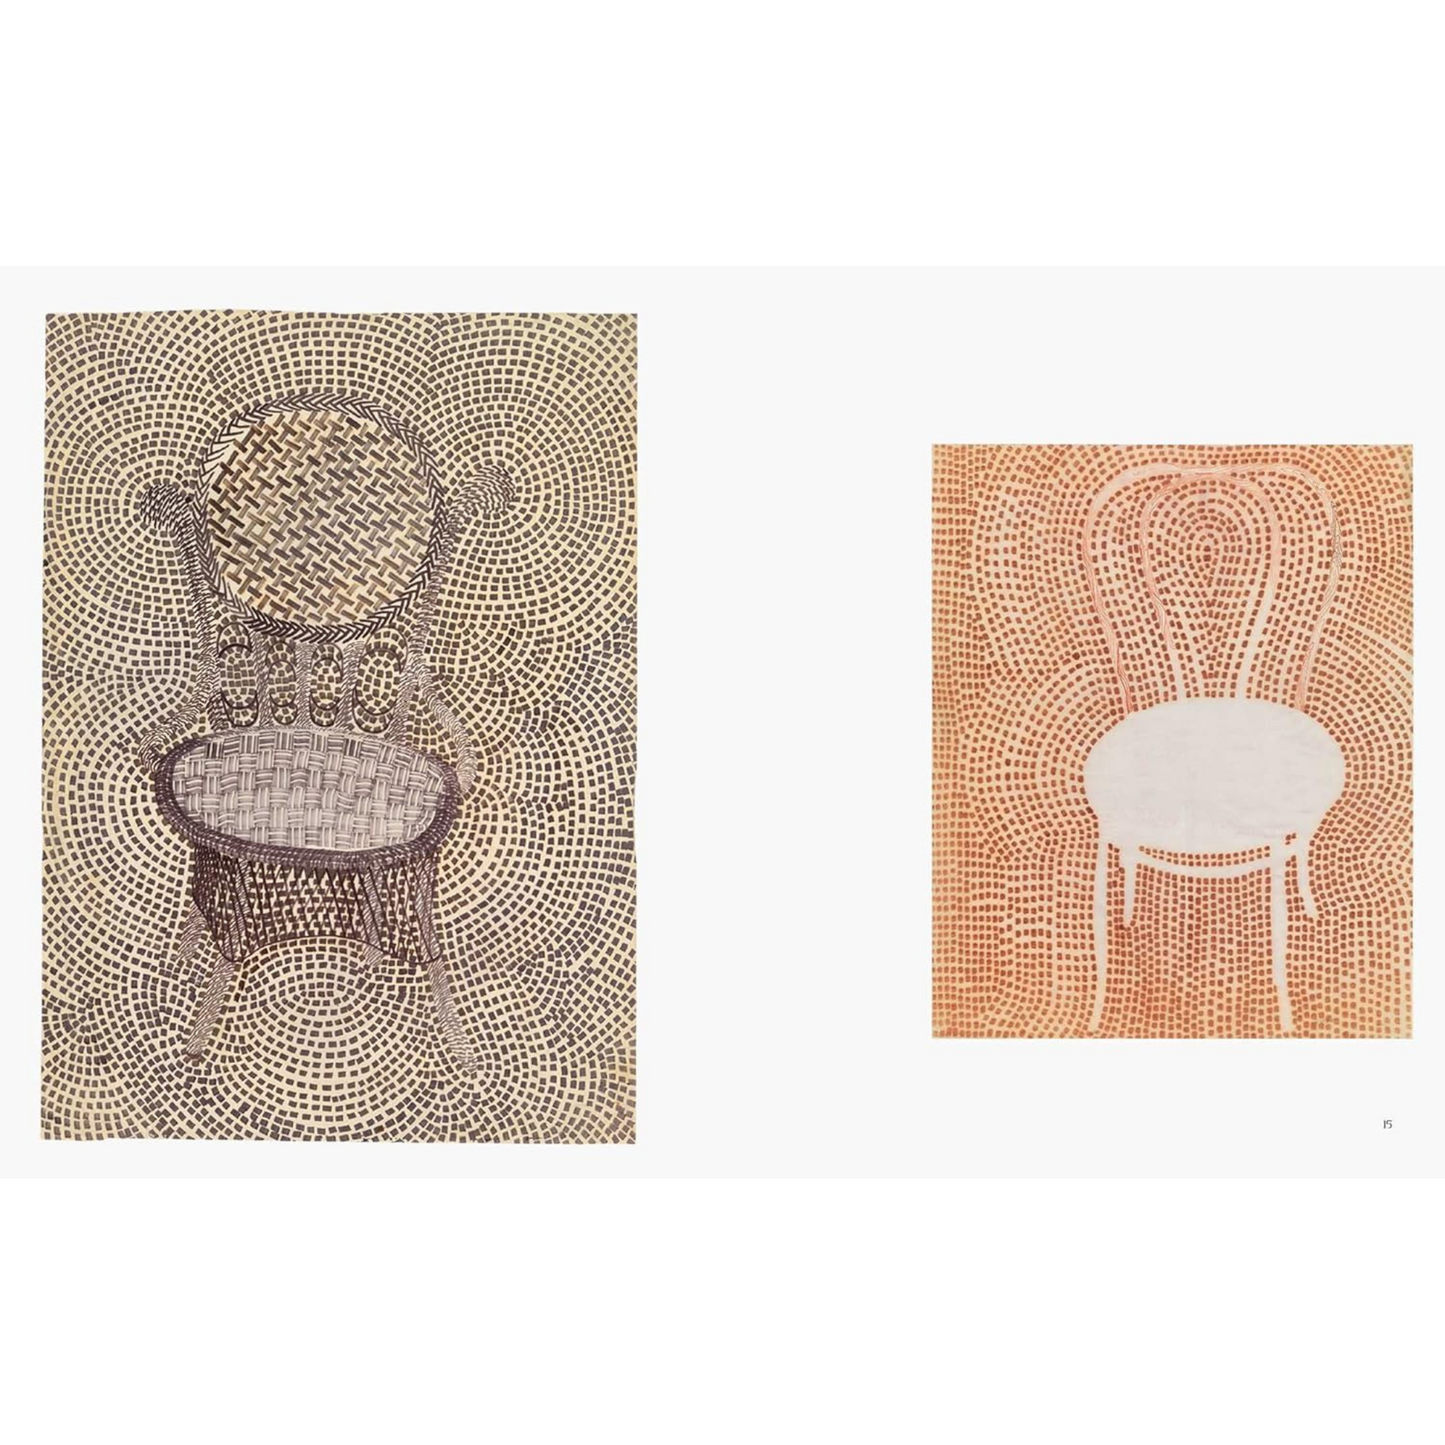 Ruth Asawa: All Is Possible